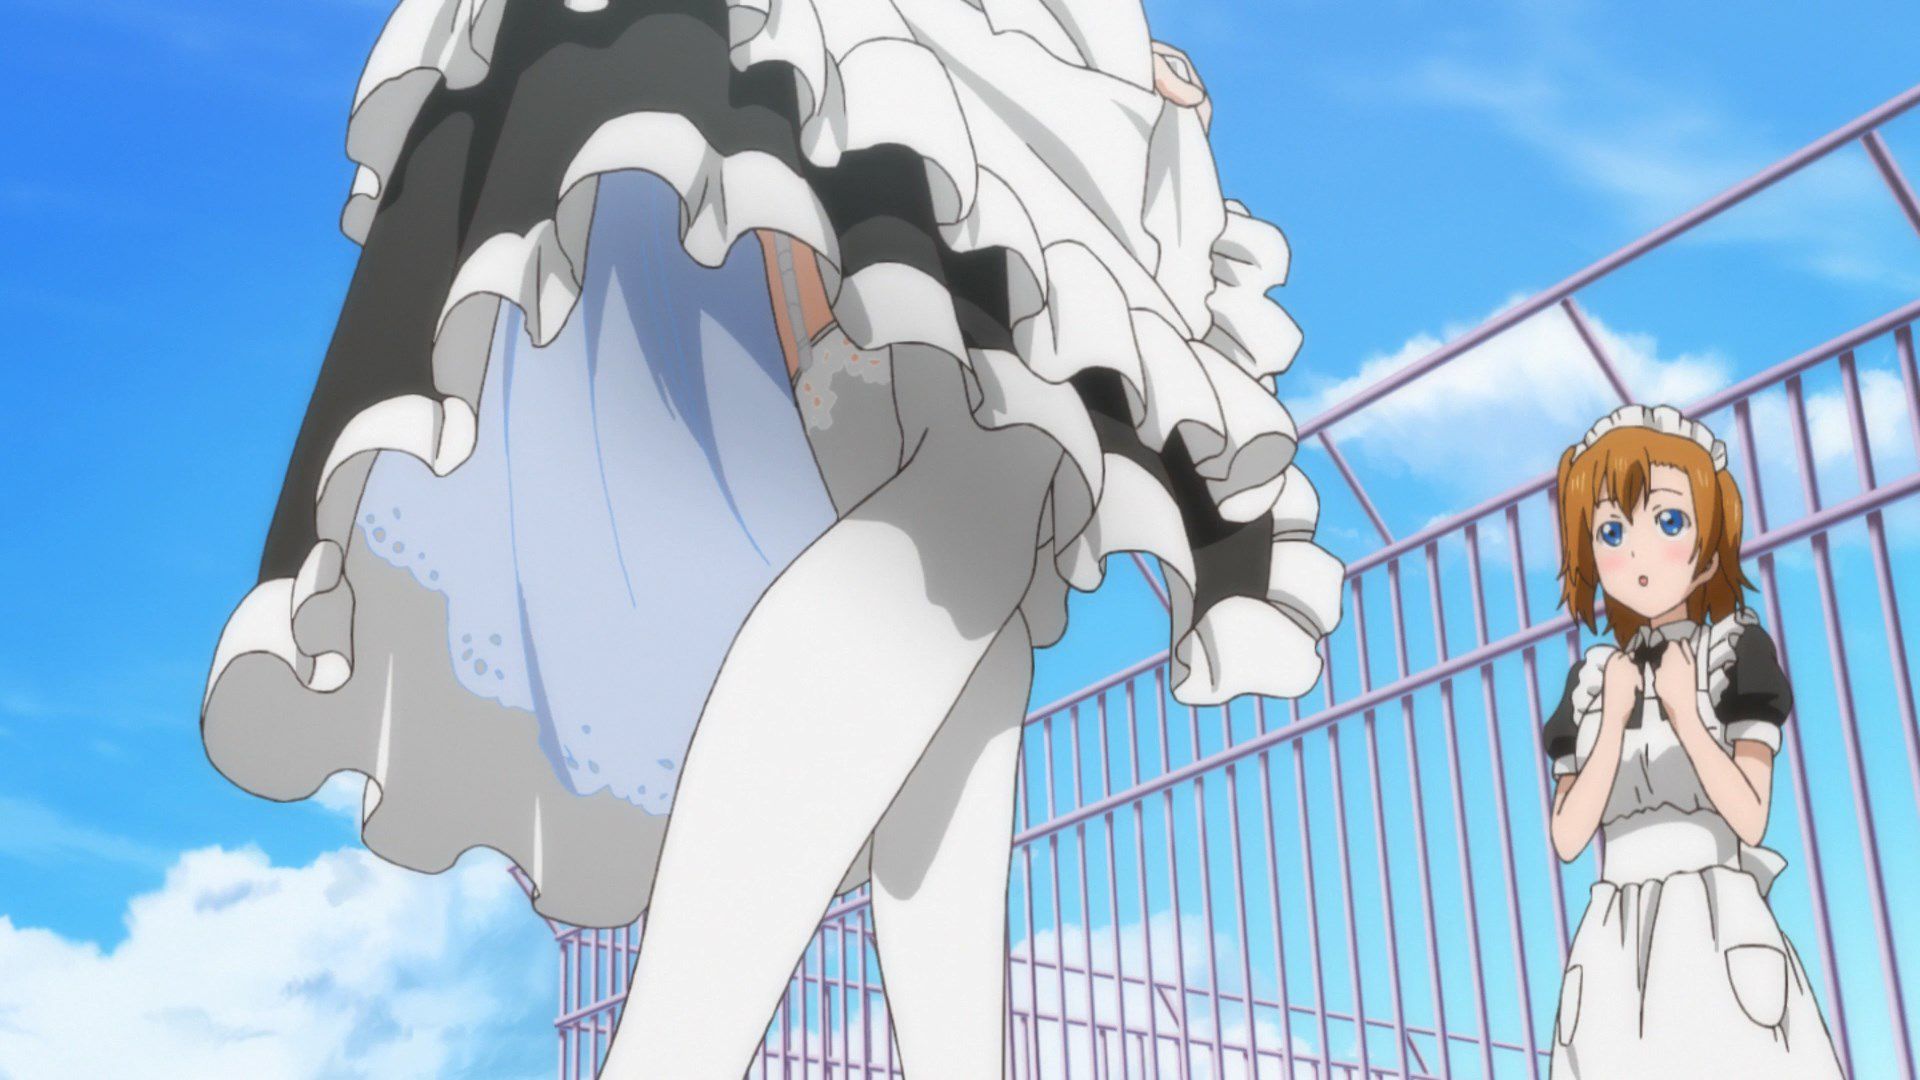 [God images] "love live! ' Μm ' PV's leg is too erotic everyone wakes up to a leg fetish of wwwww 44